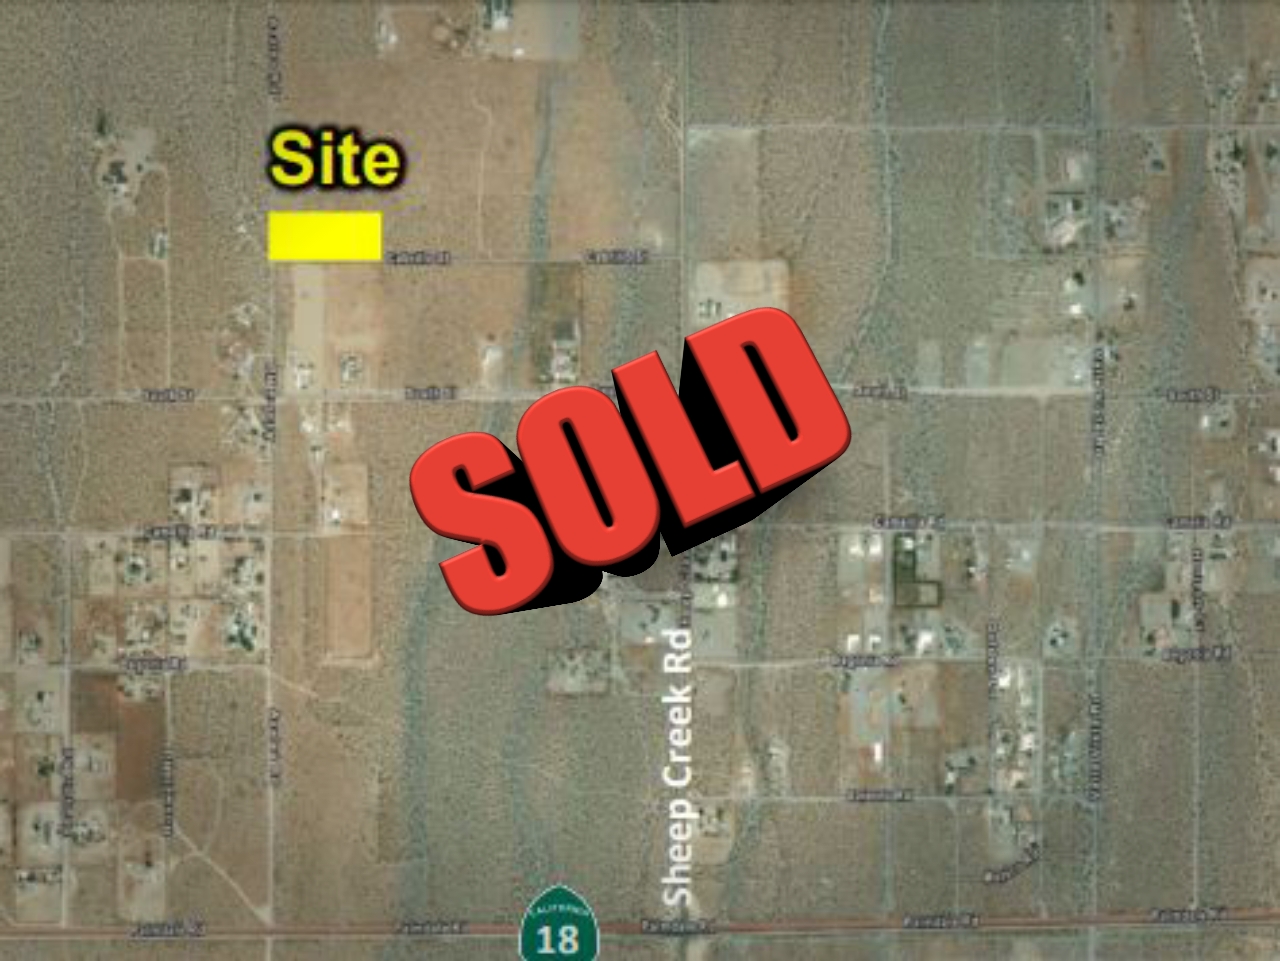 4.36 Acres of land on Cabrillo Street in Phelan, CA Sold